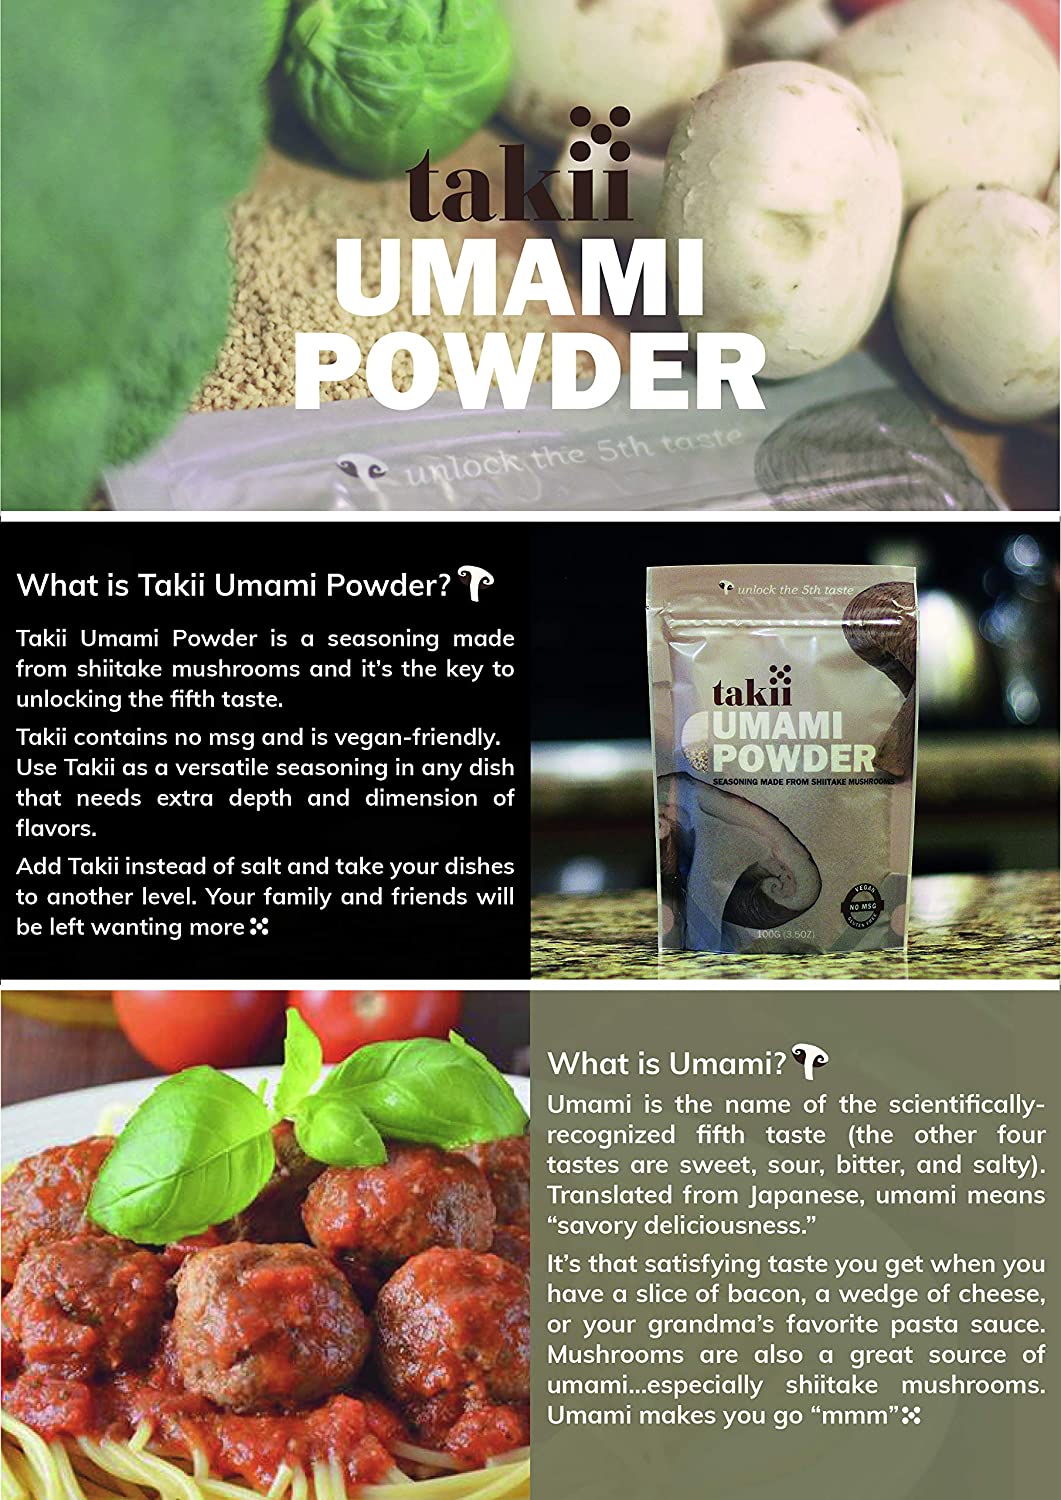 Takii Umami Powder, Made from Shiitake Mushrooms, Add Instant Flavor and Depth to All Your Favorite Dishes (1 Pack - 3.5 Ounce Pouch)